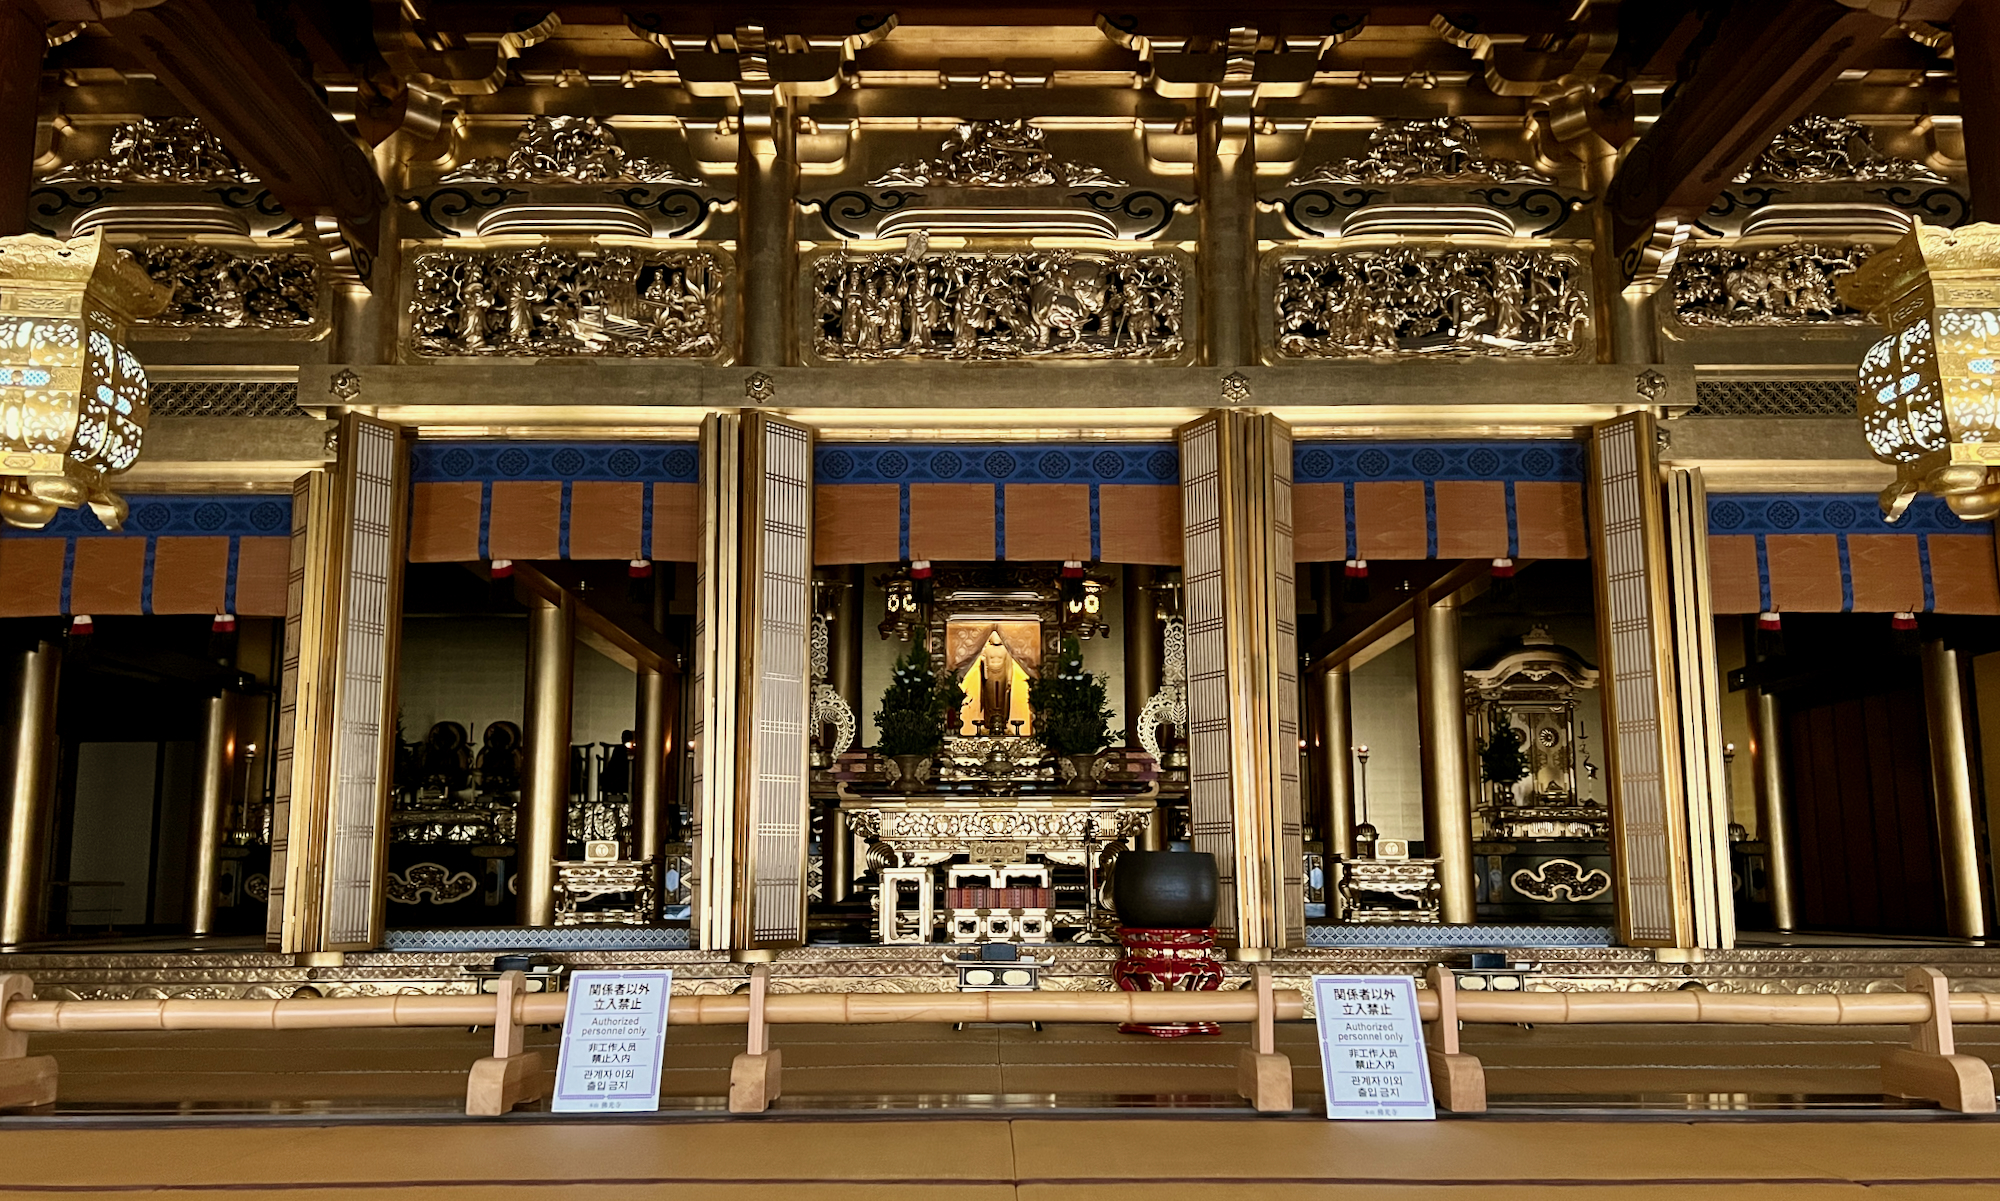 wide angle photo of a Japanese temple altar with a statue of Amida buddha in the center